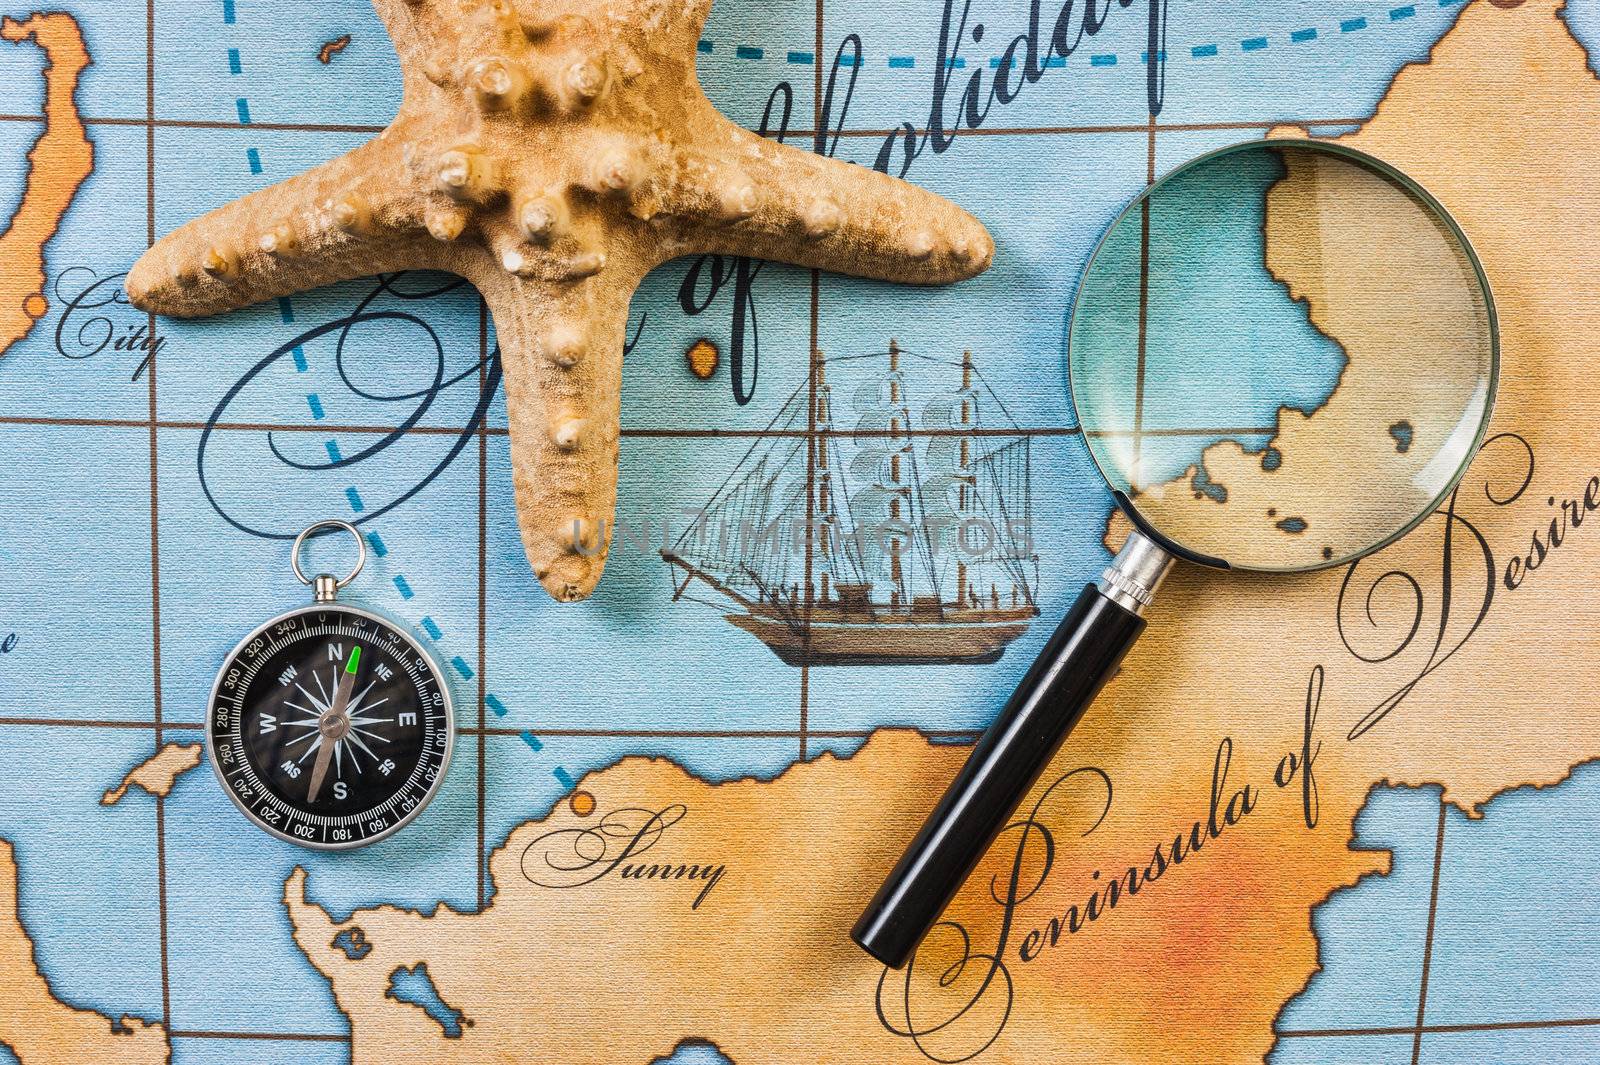 Still life with things leisure and travel on a background of map